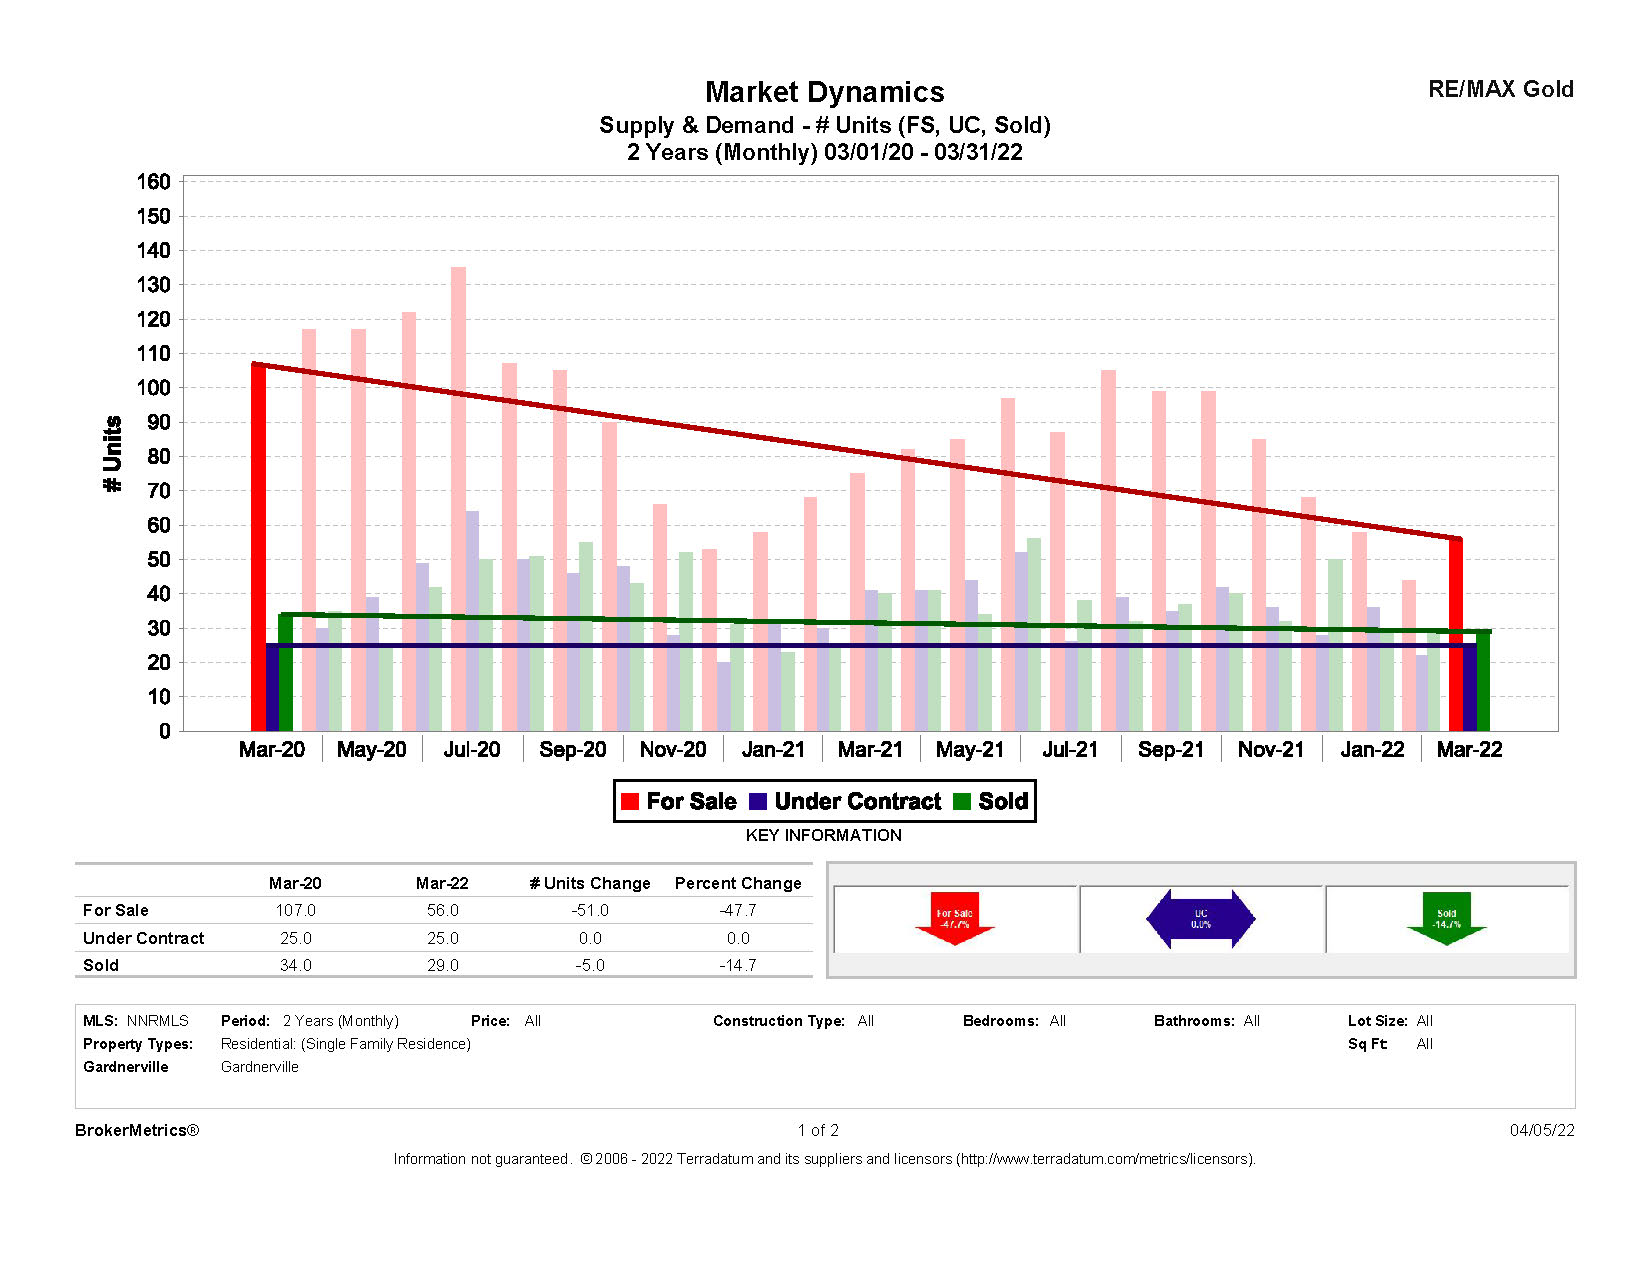 March Stats: Supply & Demand graph for Gardnerville, NV